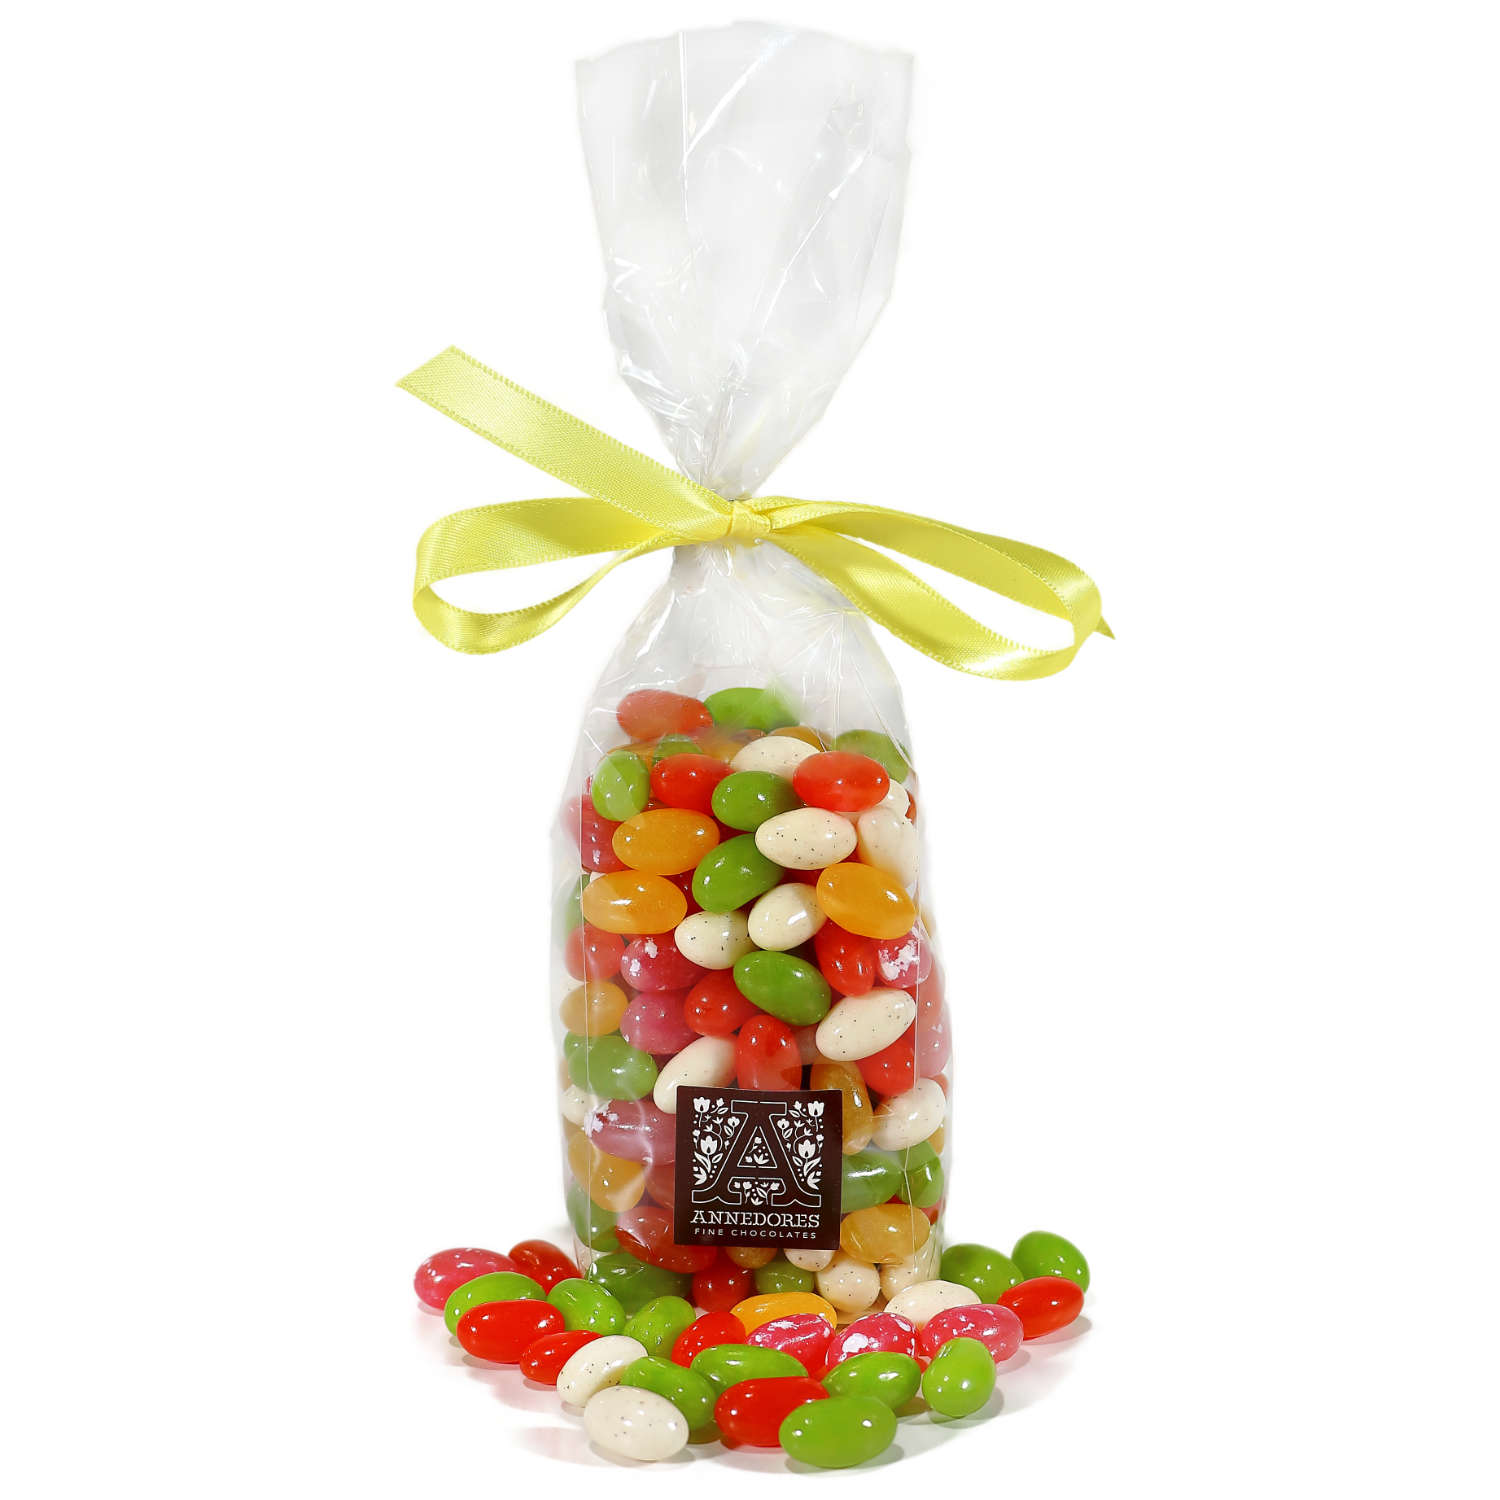 8 oz Jelly Beans in a Bag